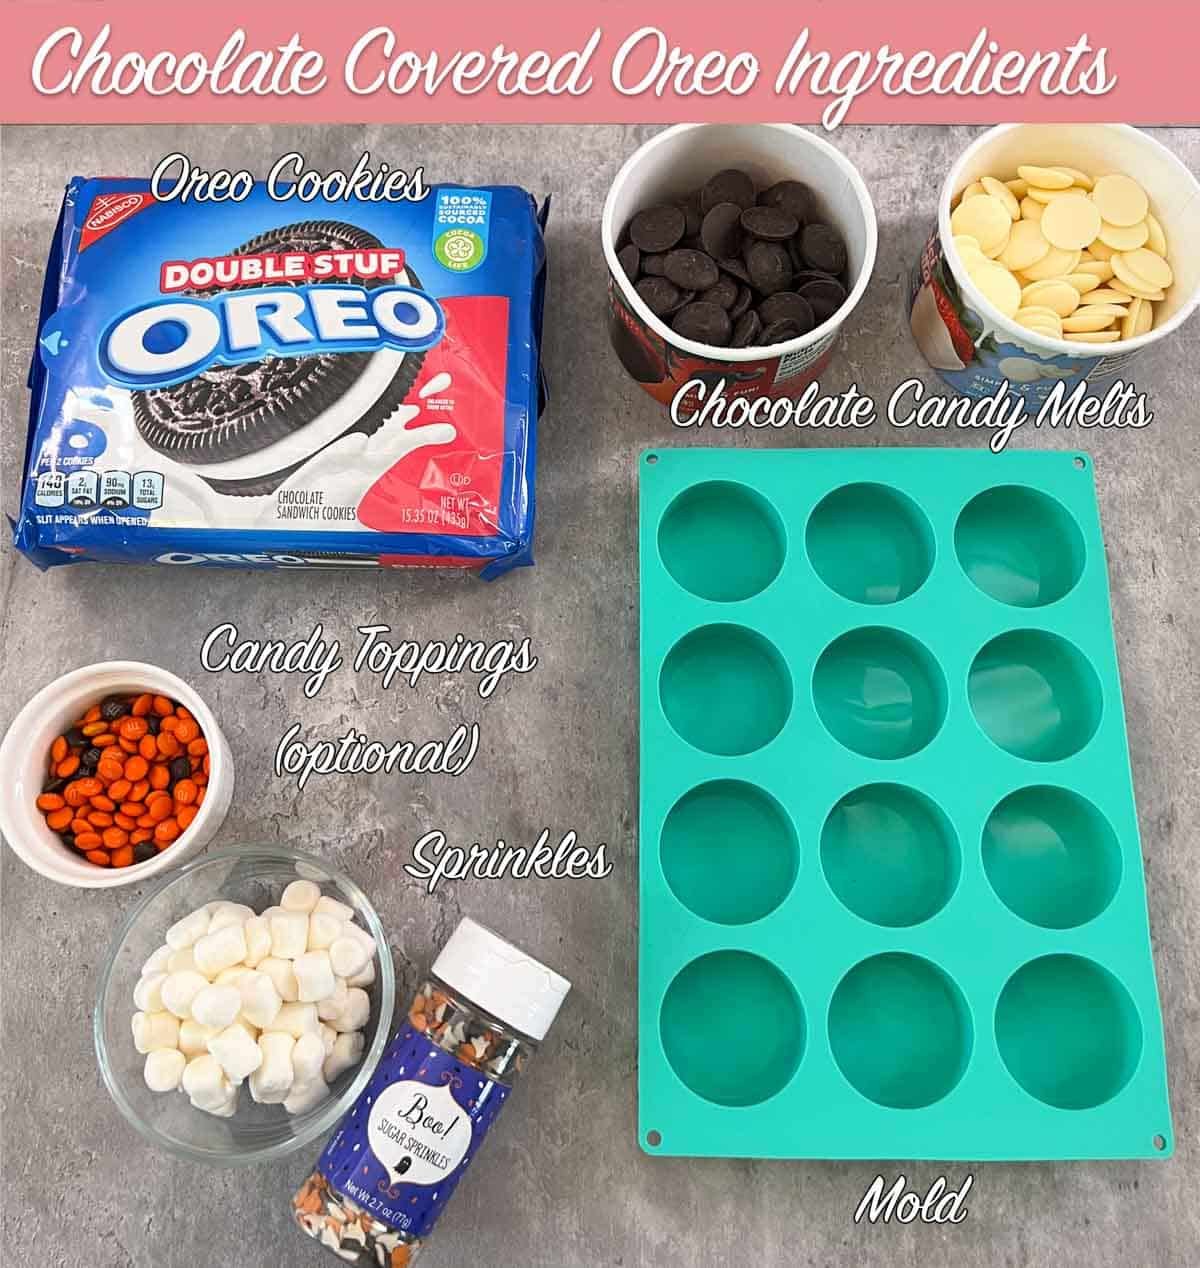 decorated halloweeningredients for chocolate covered oreos